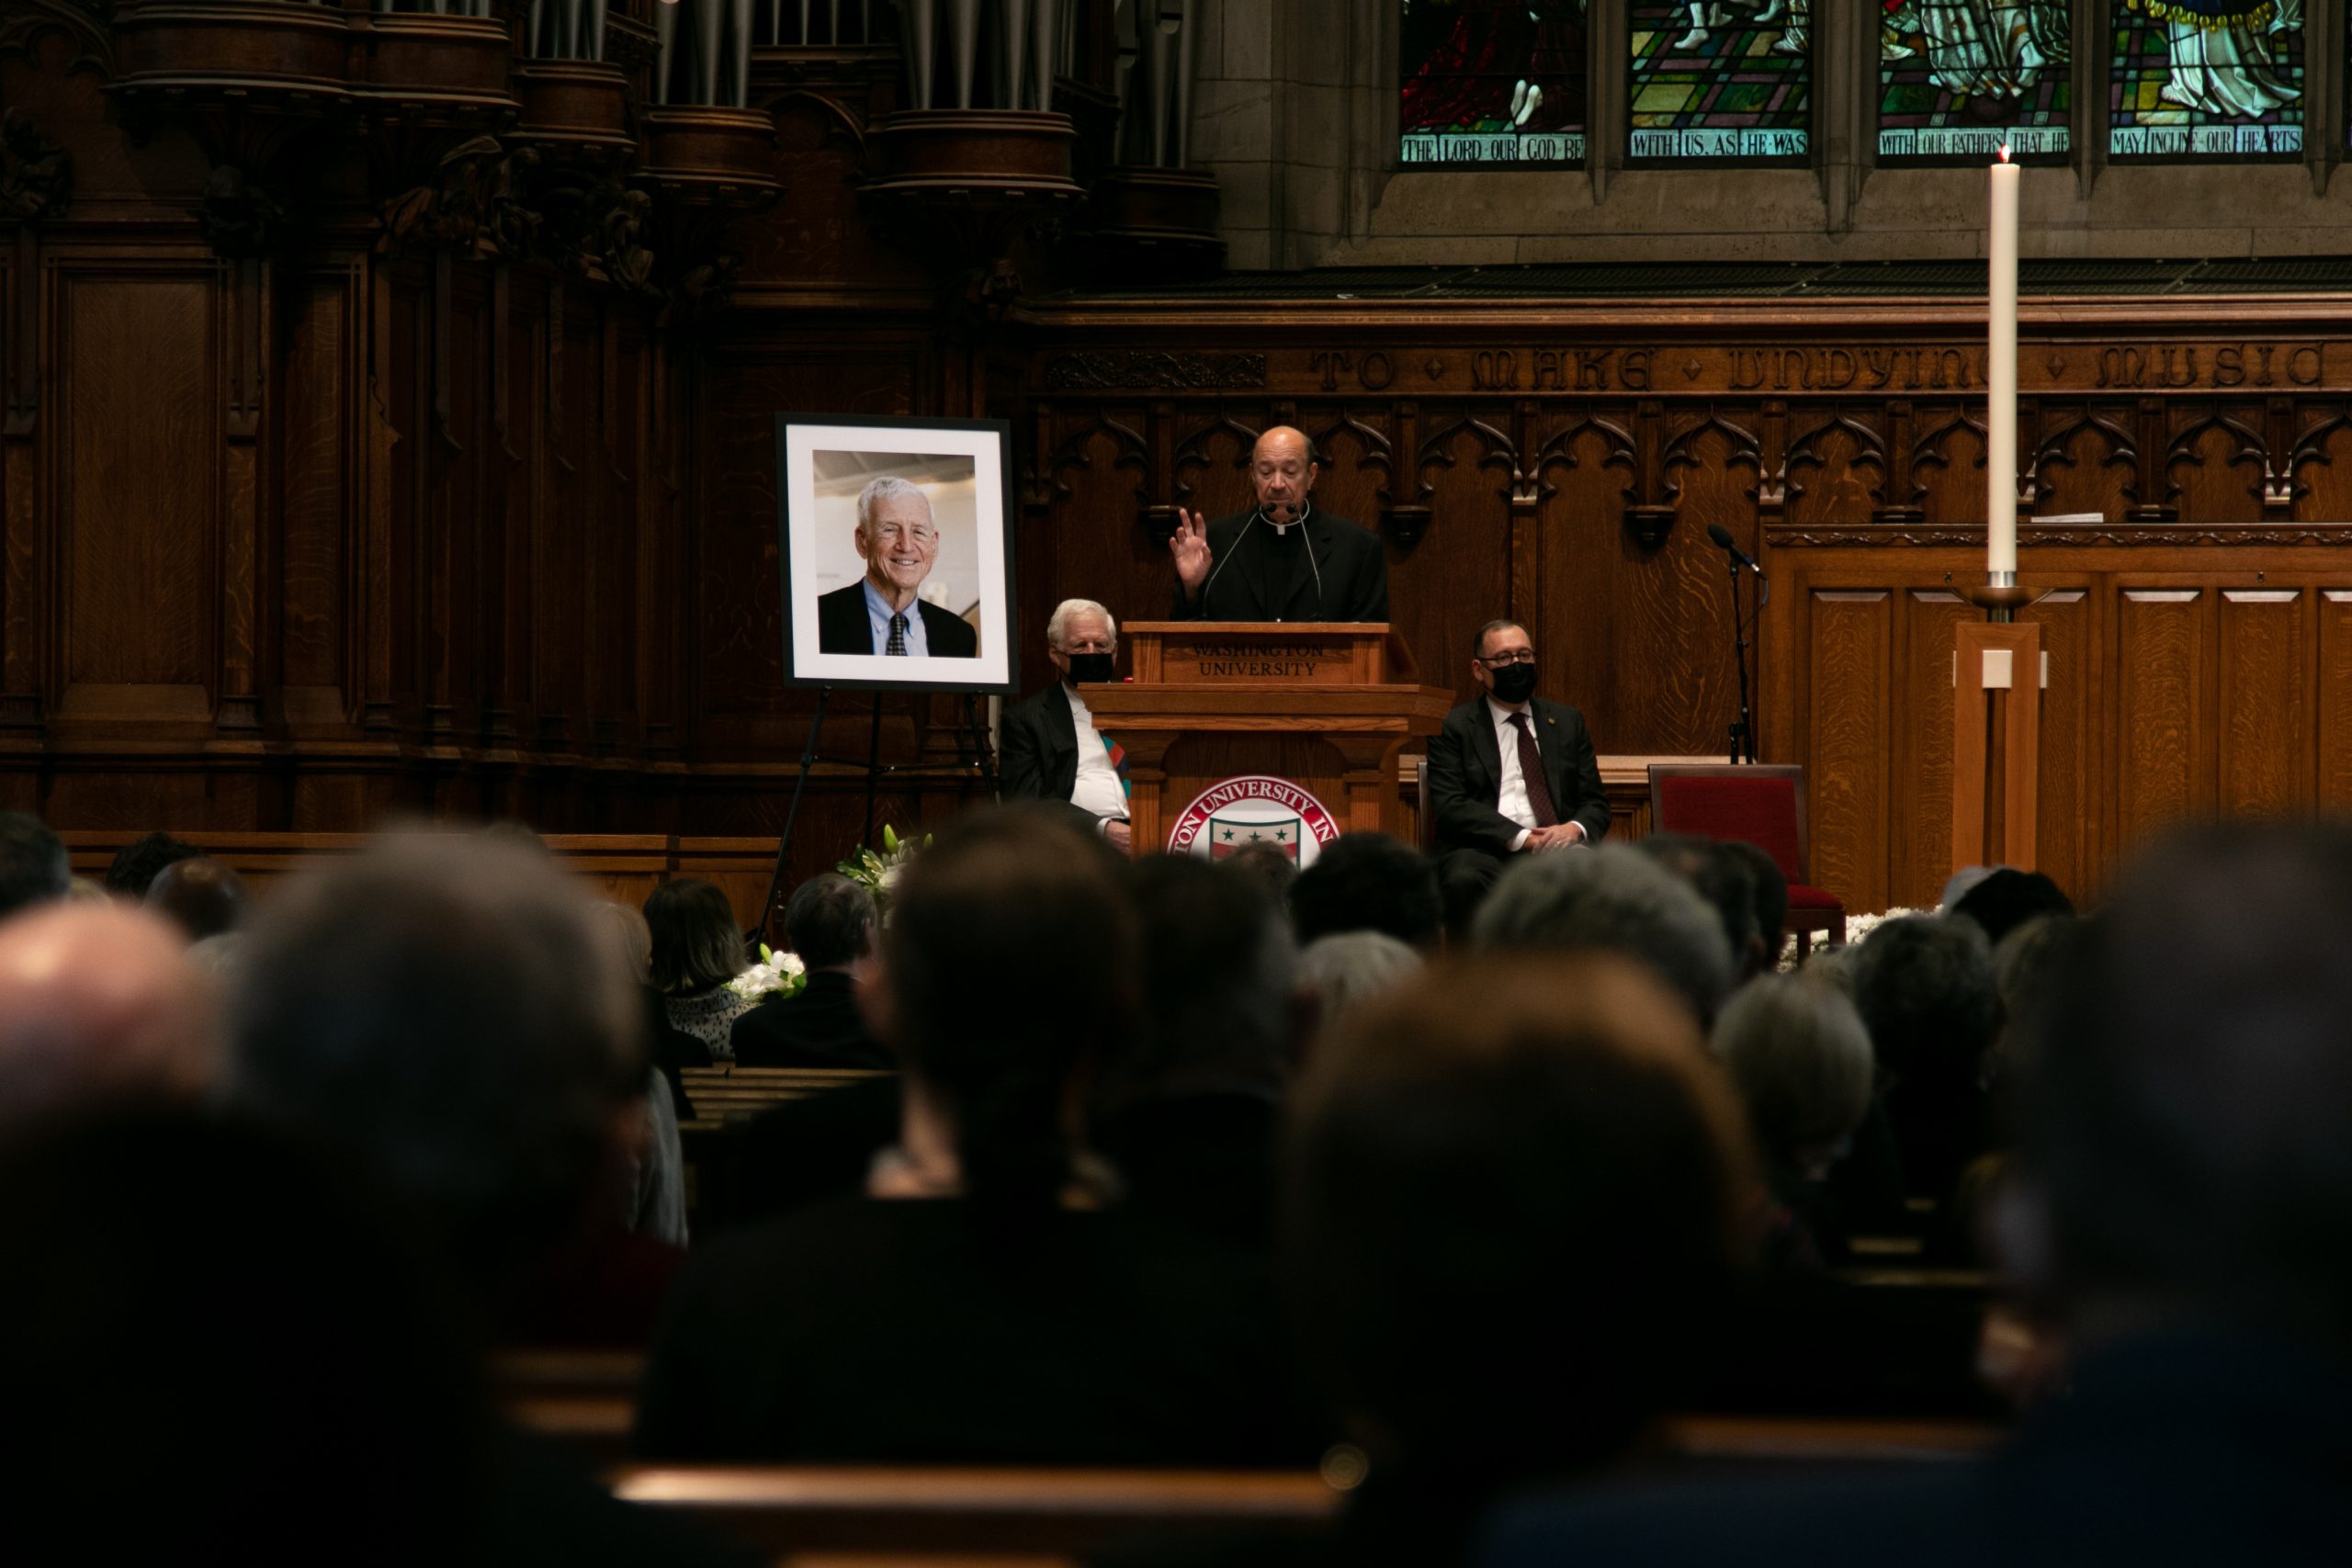 The heads of a crowd of people are visible and in the distance a man in black robes stands at a lectern. A poster with the face of a man in a suit and tie stands to the left of the lectern. 